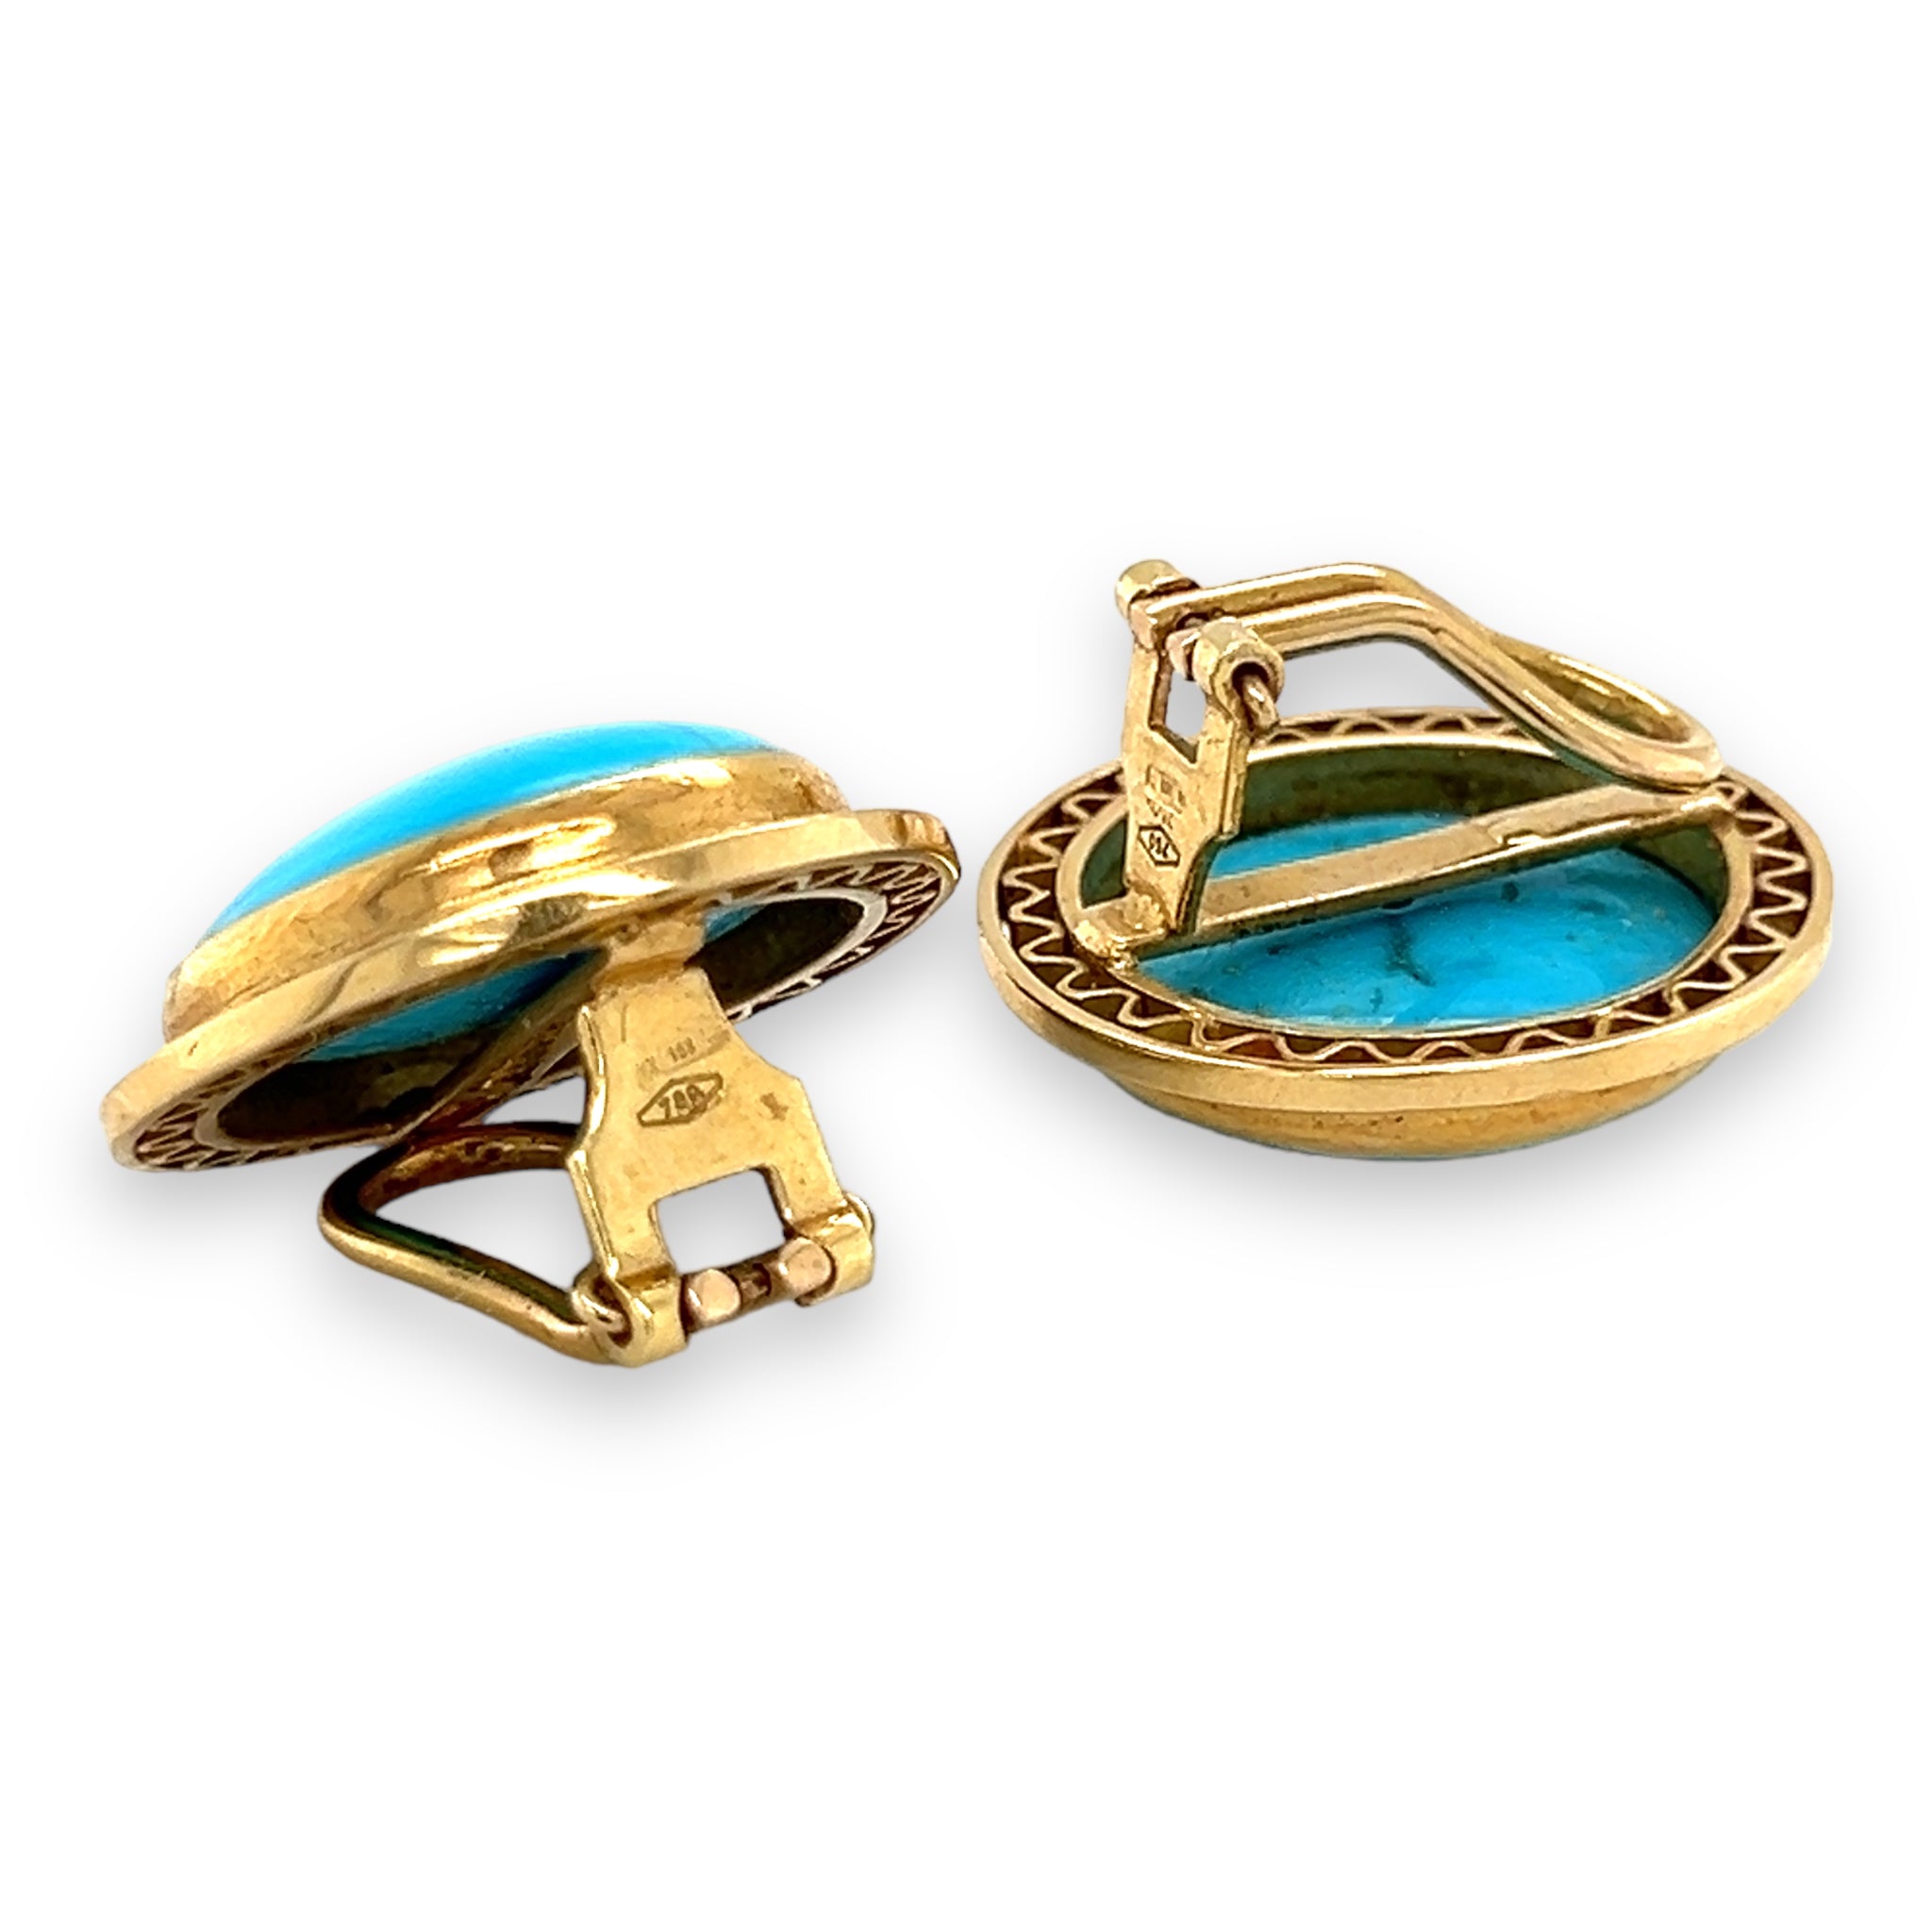 18ct Gold & Turquoise Earrings - Wildsmith Jewellery